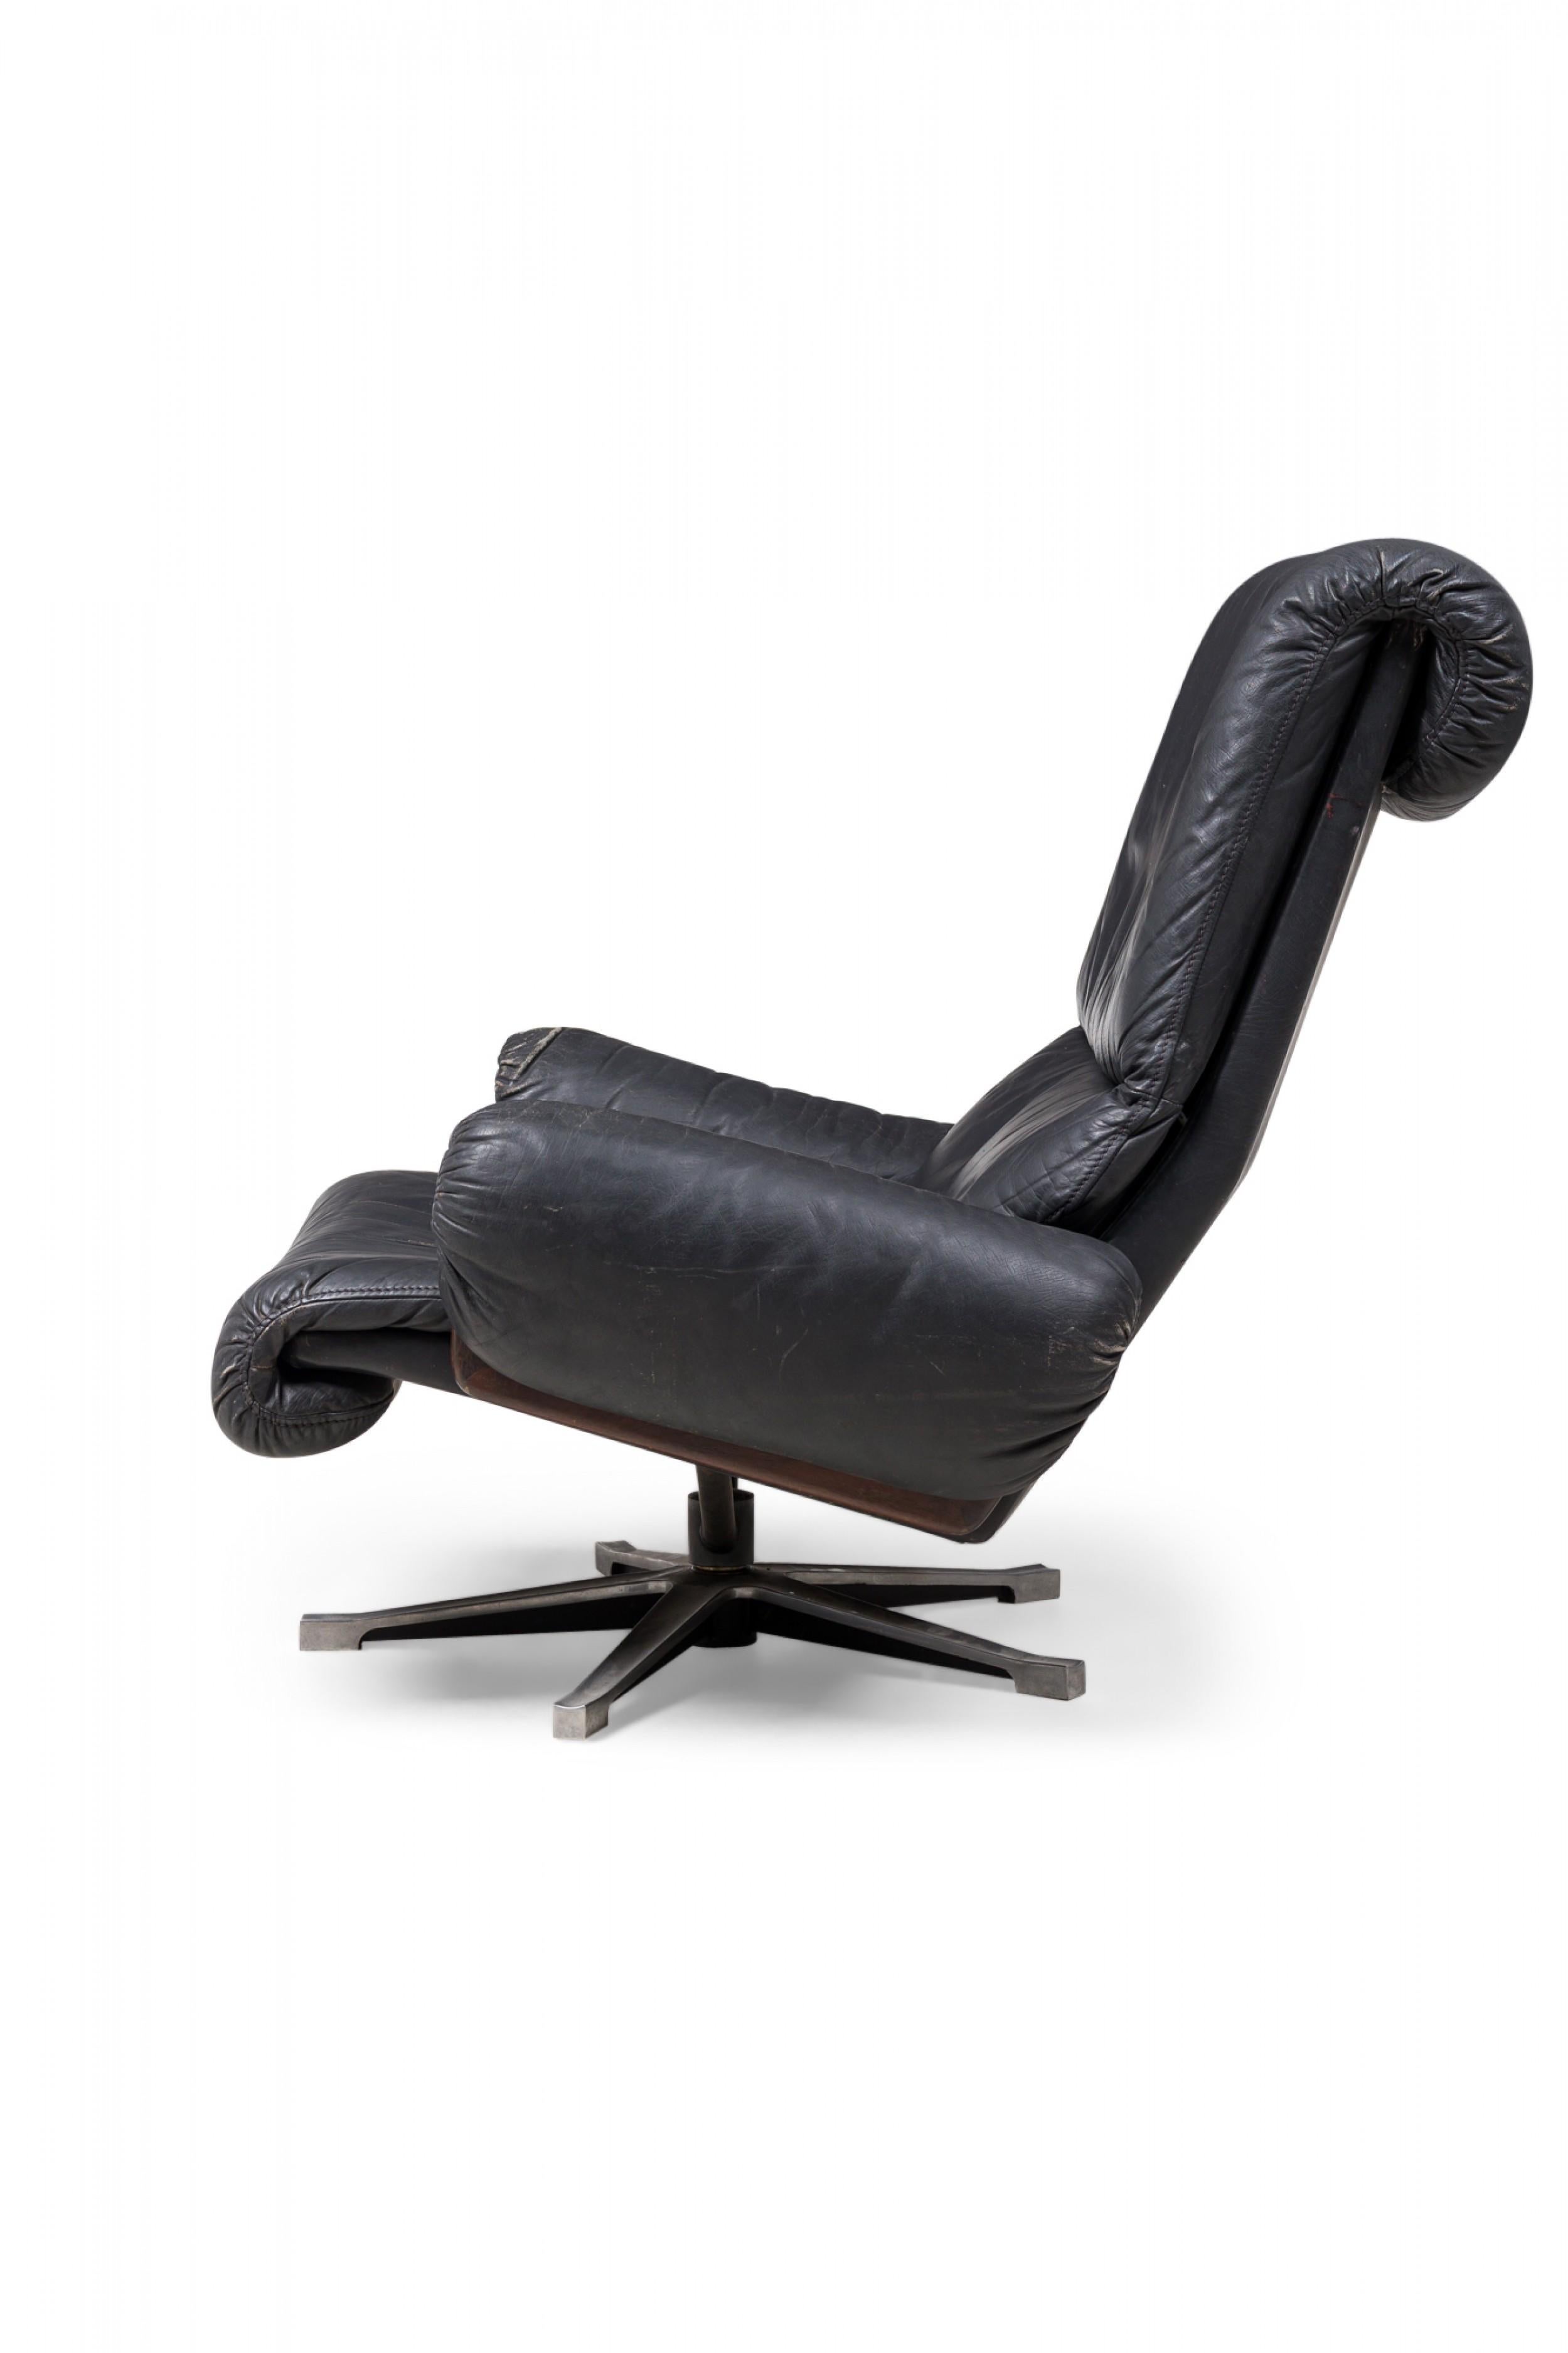 Desede Midcentury Swiss Metal & Black Leather Upholstered Swivel Chair In Good Condition For Sale In New York, NY